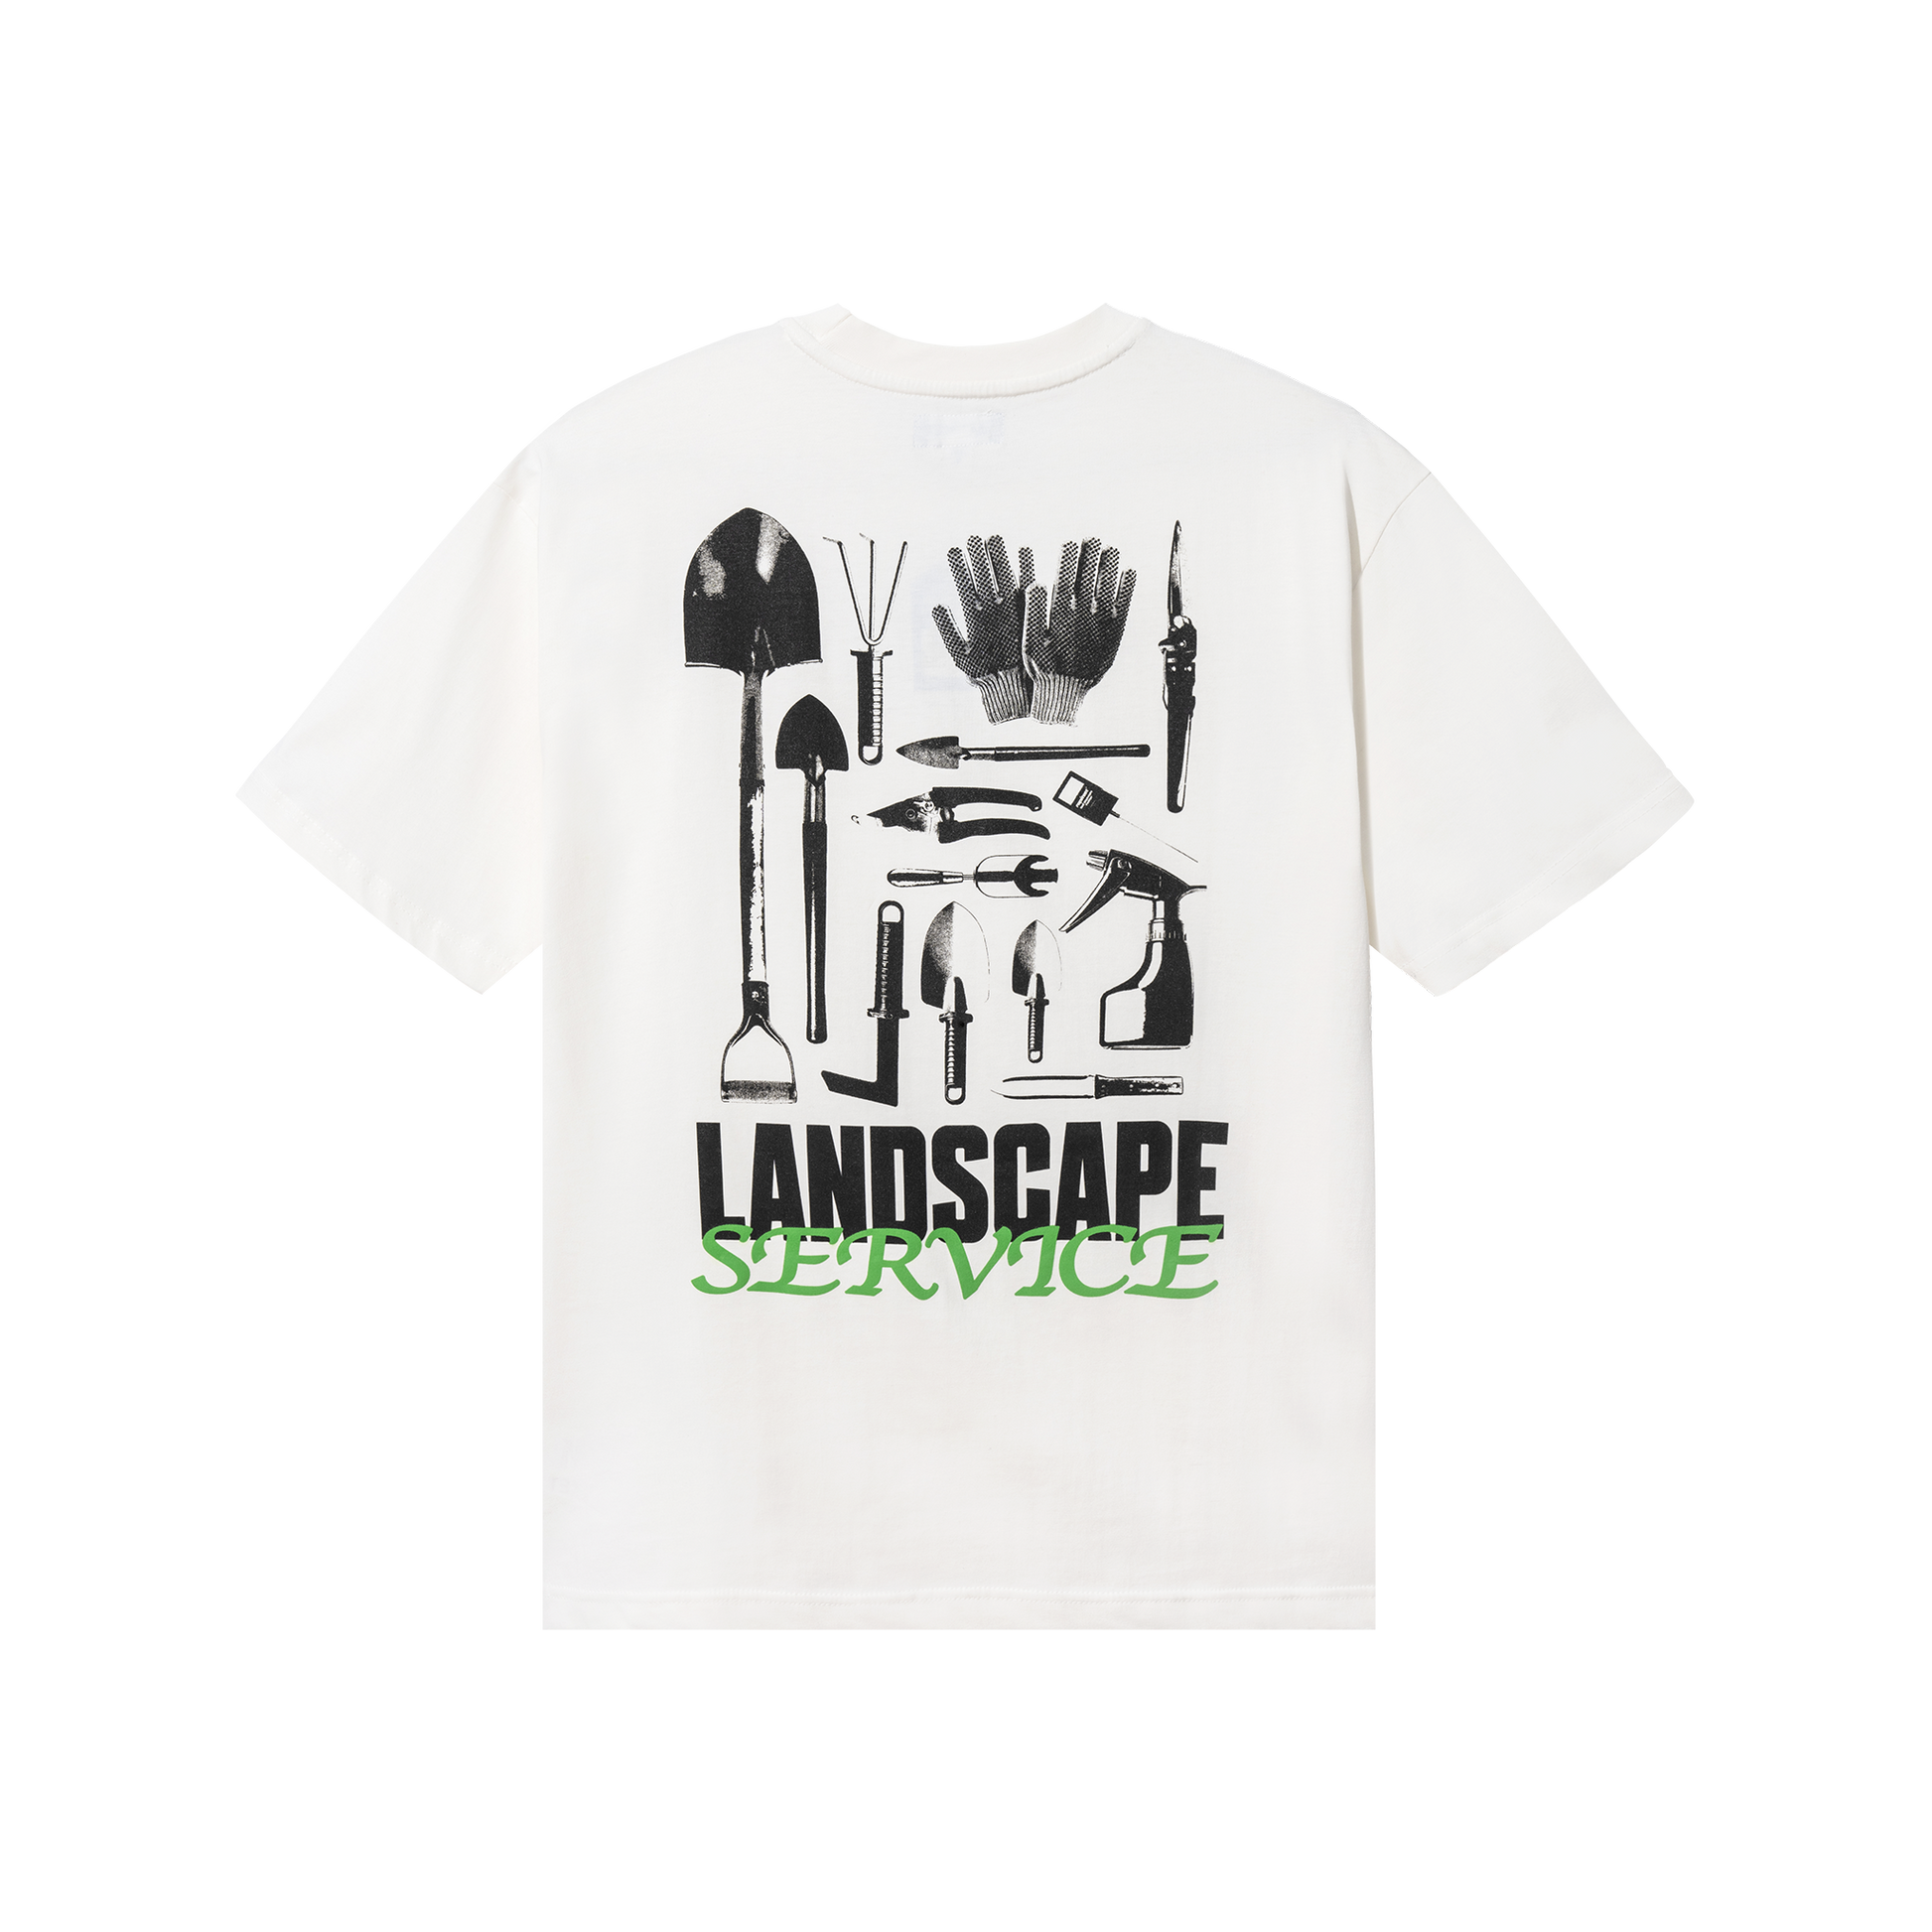 MARKET clothing brand LANDSCAPE SERVICE POCKET T-SHIRT. Find more graphic tees, hats, hoodies and more at MarketStudios.com. Formally Chinatown Market.